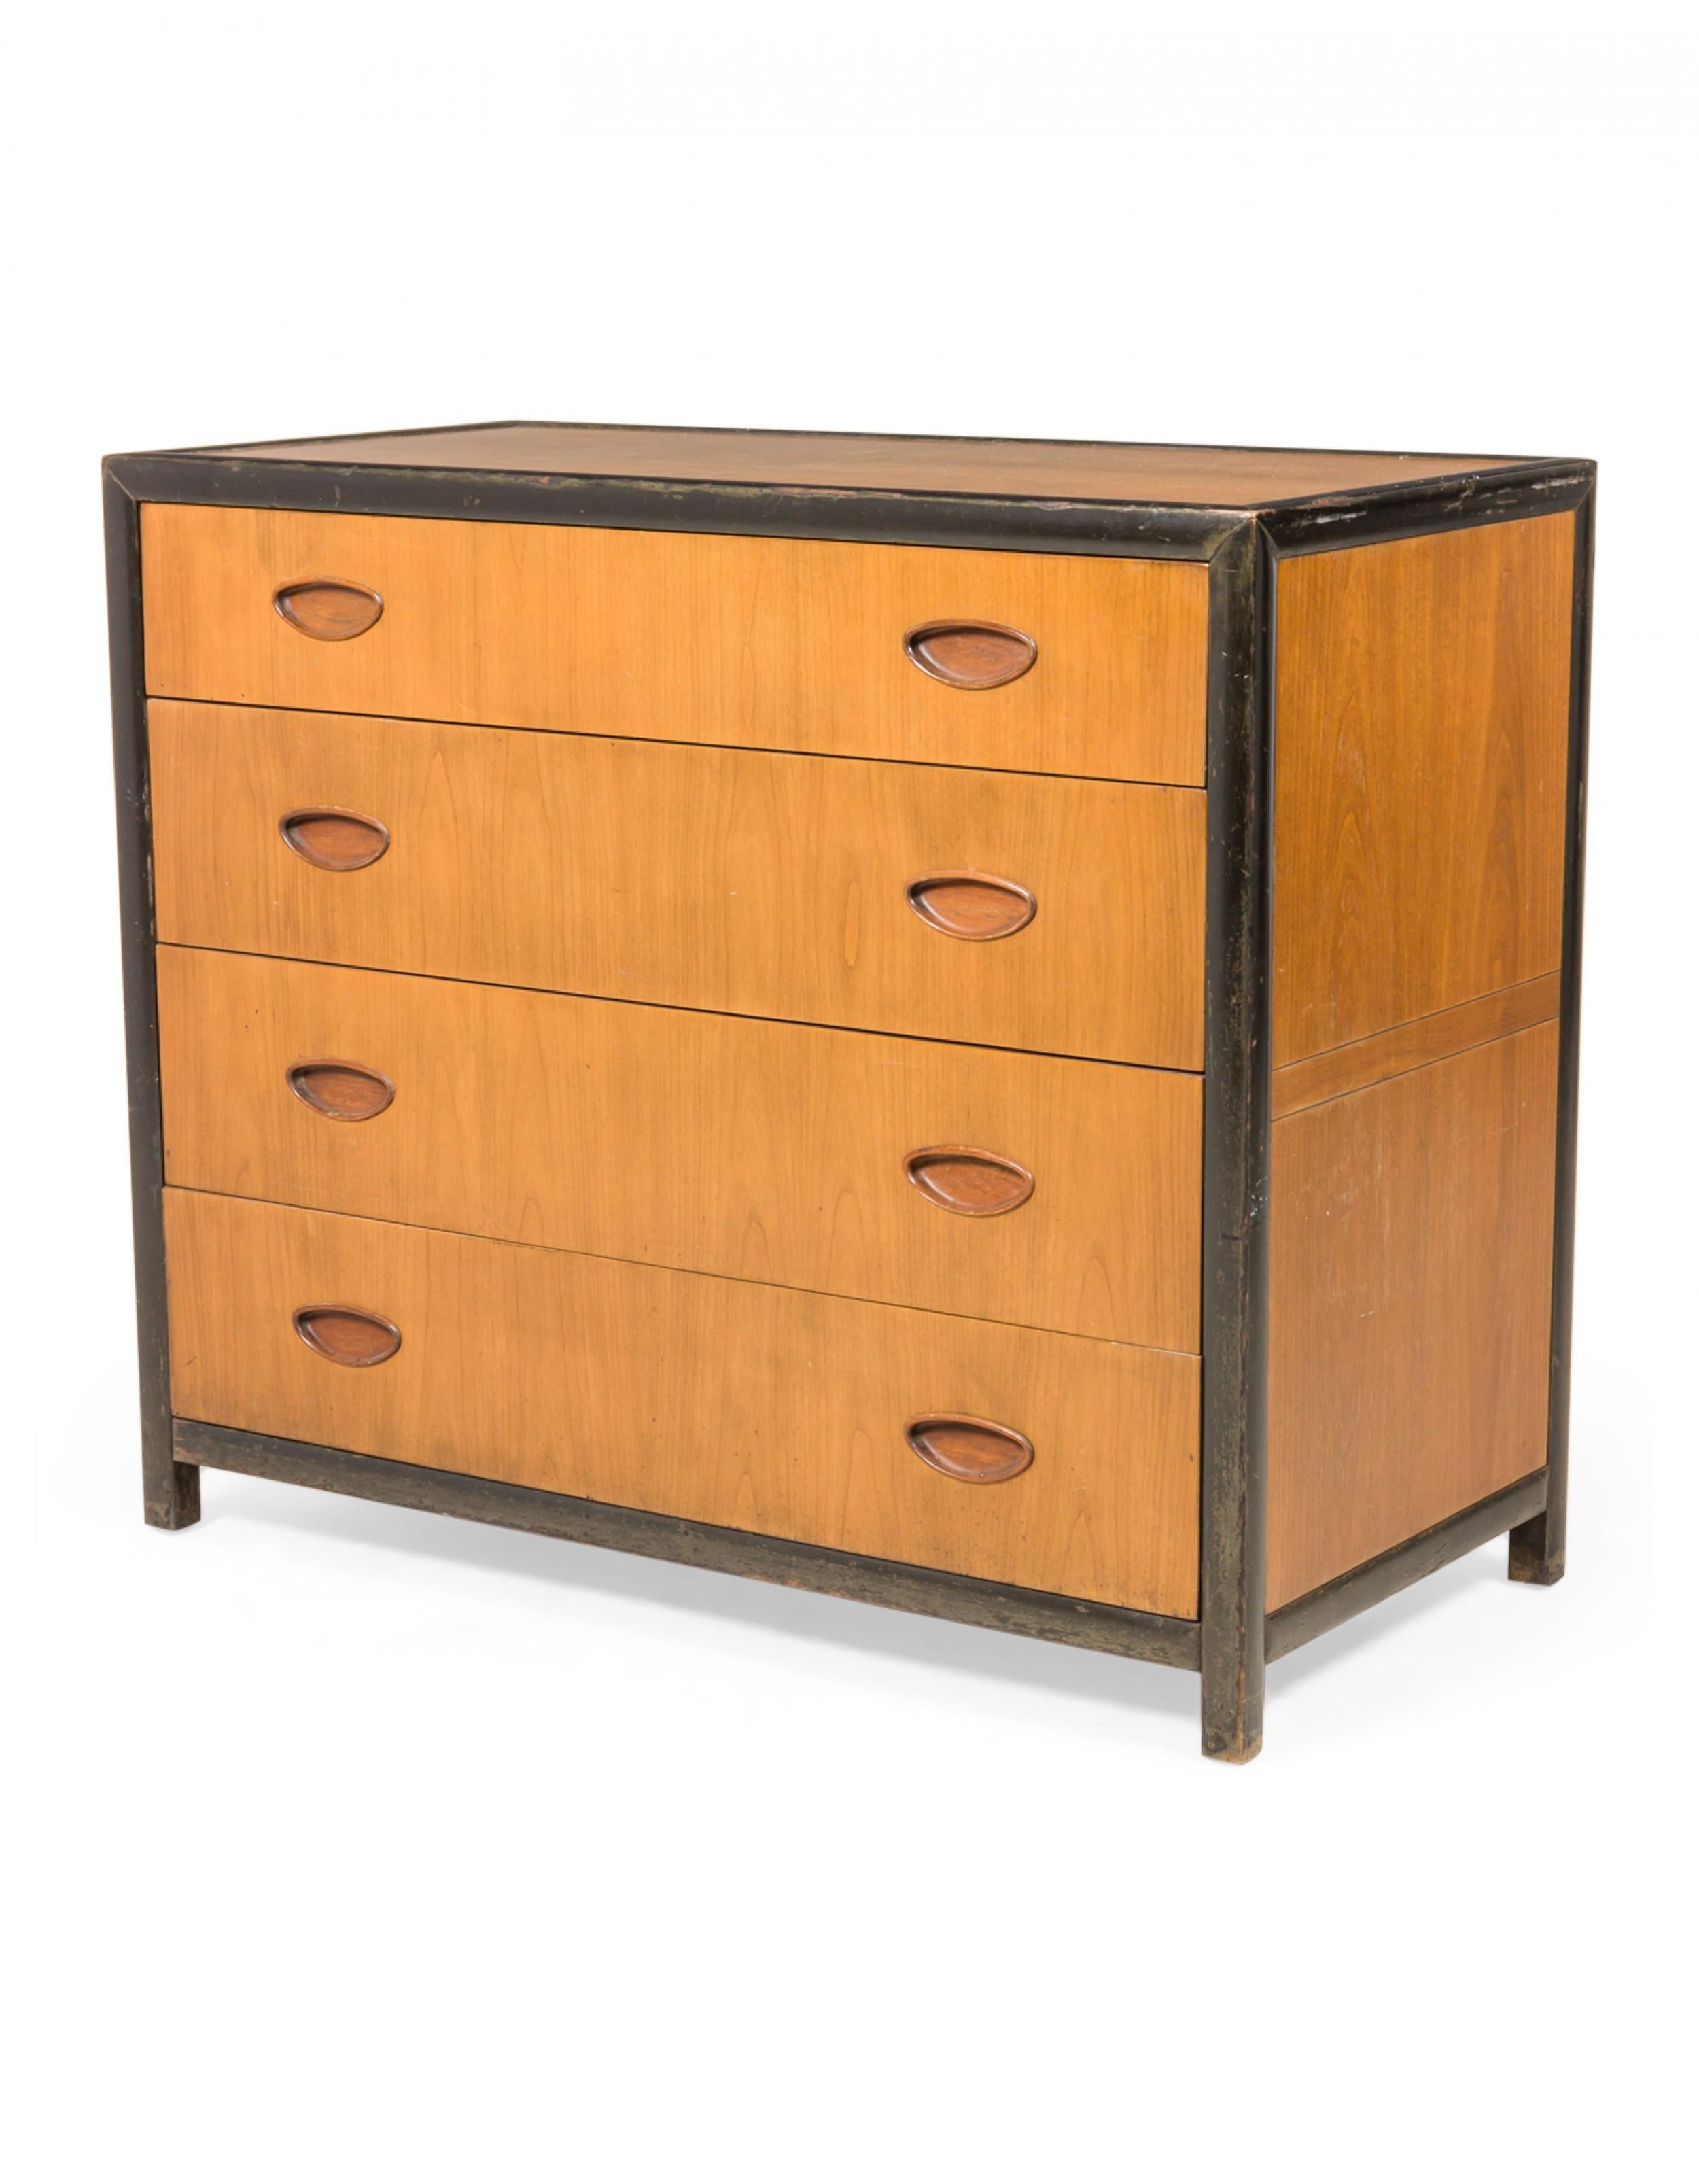 American Mid-Century four drawer commode with a dark stained frame and walnut drawer fronts and body with cut out half-moon drawer pulls. (MICHAEL TAYLOR FOR BAKER FURNITURE CO, NEW WORLD GROUP).